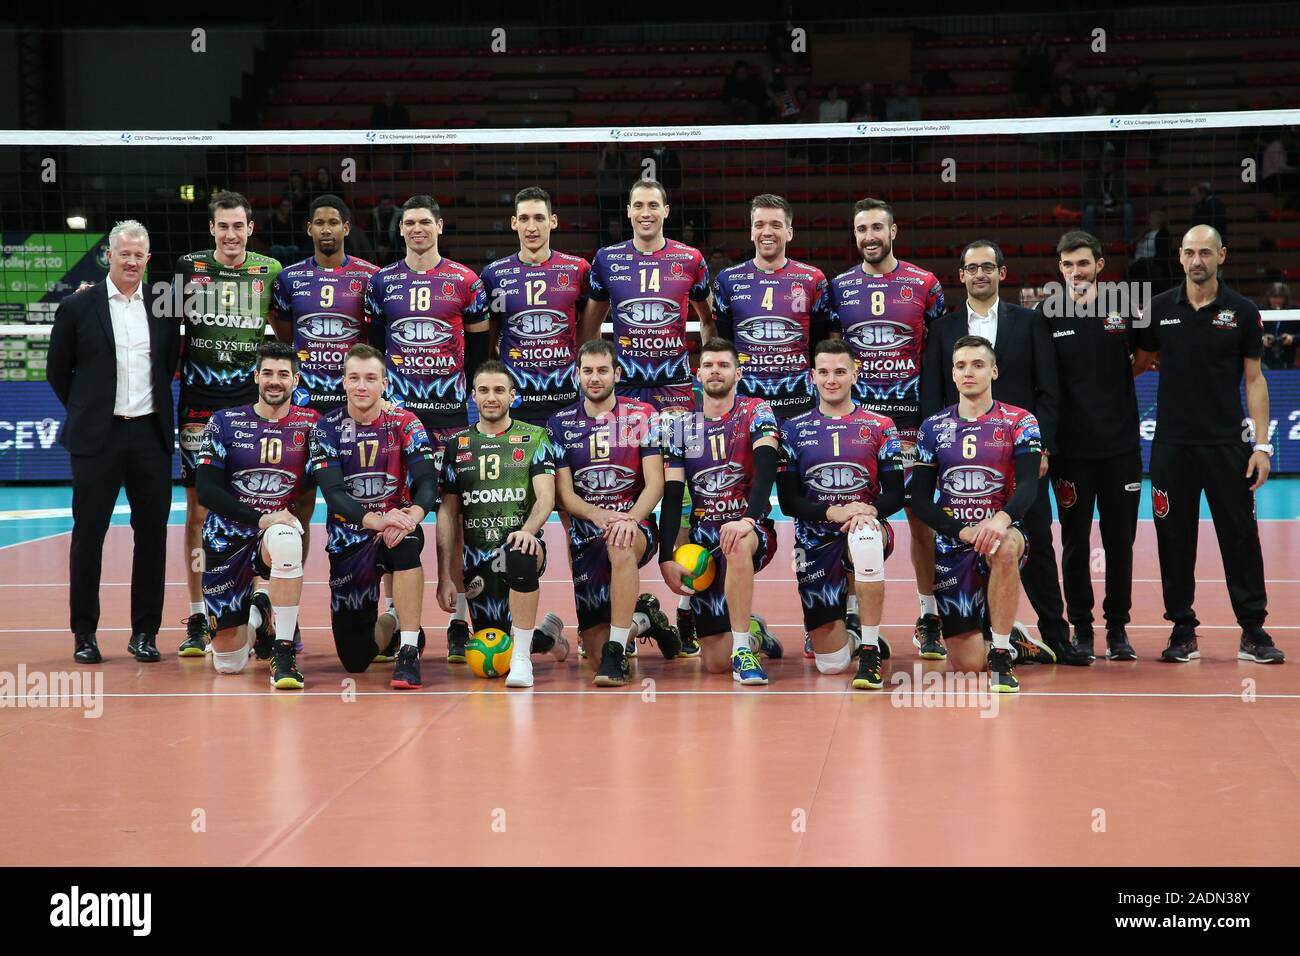 Perugia, Italy. 4th Dec, 2019. line up sir sicoma monini perugiaduring Sir Sicoma Monini Perugia vs Benfica Lisbona, Volleybal Champions League Men Championship in Perugia, Italy, December 04 2019 - LPS/Loris Cerquiglini Credit: Loris Cerquiglini/LPS/ZUMA Wire/Alamy Live News Stock Photo